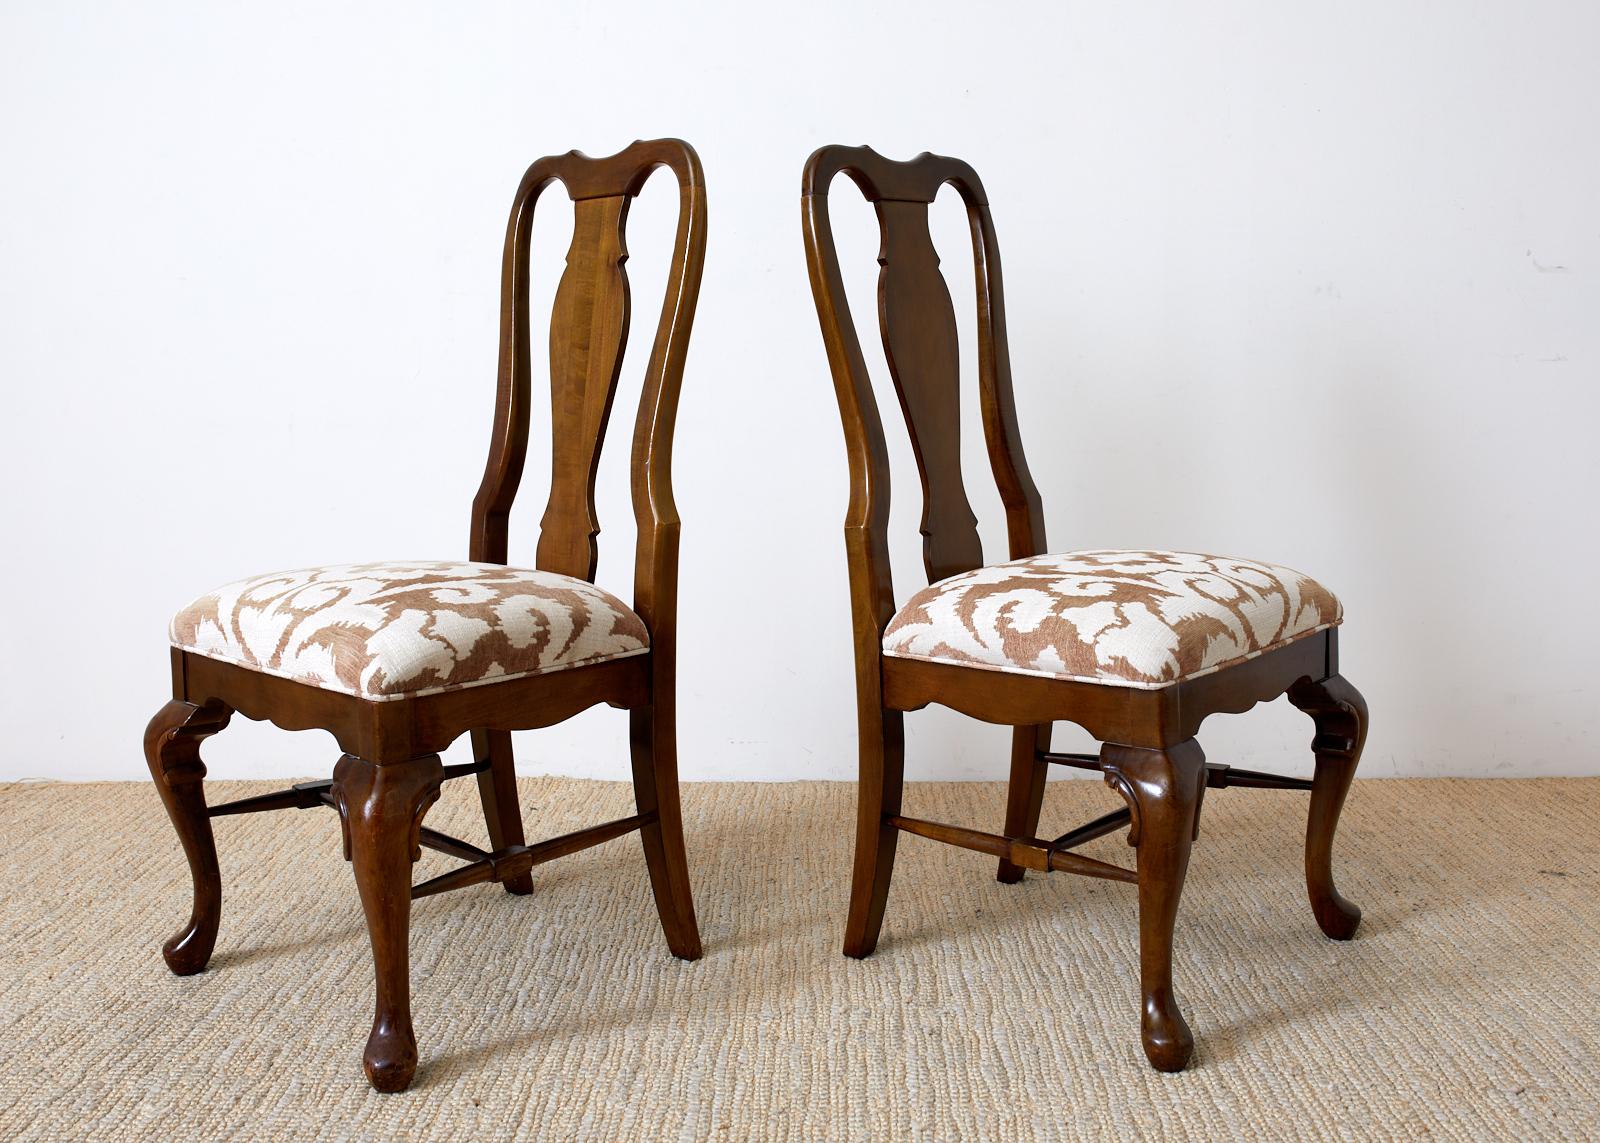 Handsome set of ten mahogany dining chairs made in the Queen Anne taste. Features a tall shaped back having a vasiform splat with an upholstered seat. Modern floral motif print on linen style fabric seat. Supported by cabriole legs in front ending